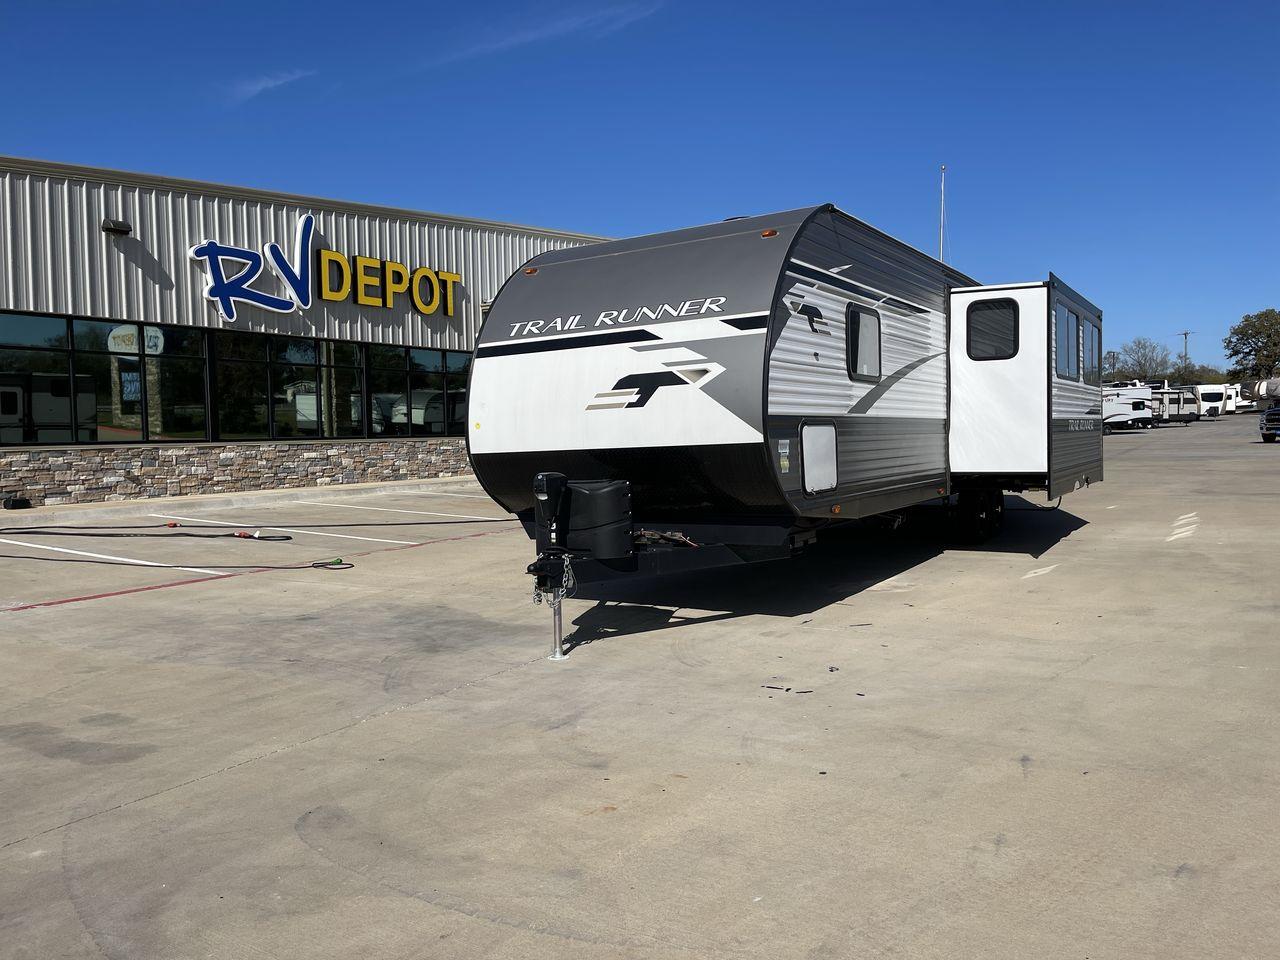 2023 HEARTLAND TRAIL RUNNER 31DB (5SFEB3729PE) , Length: 36.92 ft | Dry Weight: 7,040 lbs | GVWR: 9,642 lbs | Slides: 1 transmission, located at 4319 N Main St, Cleburne, TX, 76033, (817) 678-5133, 32.385960, -97.391212 - Are you ready to embark on the ultimate road trip adventure? Look no further than this incredible 2023 Heartland Trail Runner 31DB travel trailer, available for sale at RV Depot in Cleburne, TX. With its impressive features and unbeatable price of $37,995, this vehicle is a dream come true for any t - Photo #0